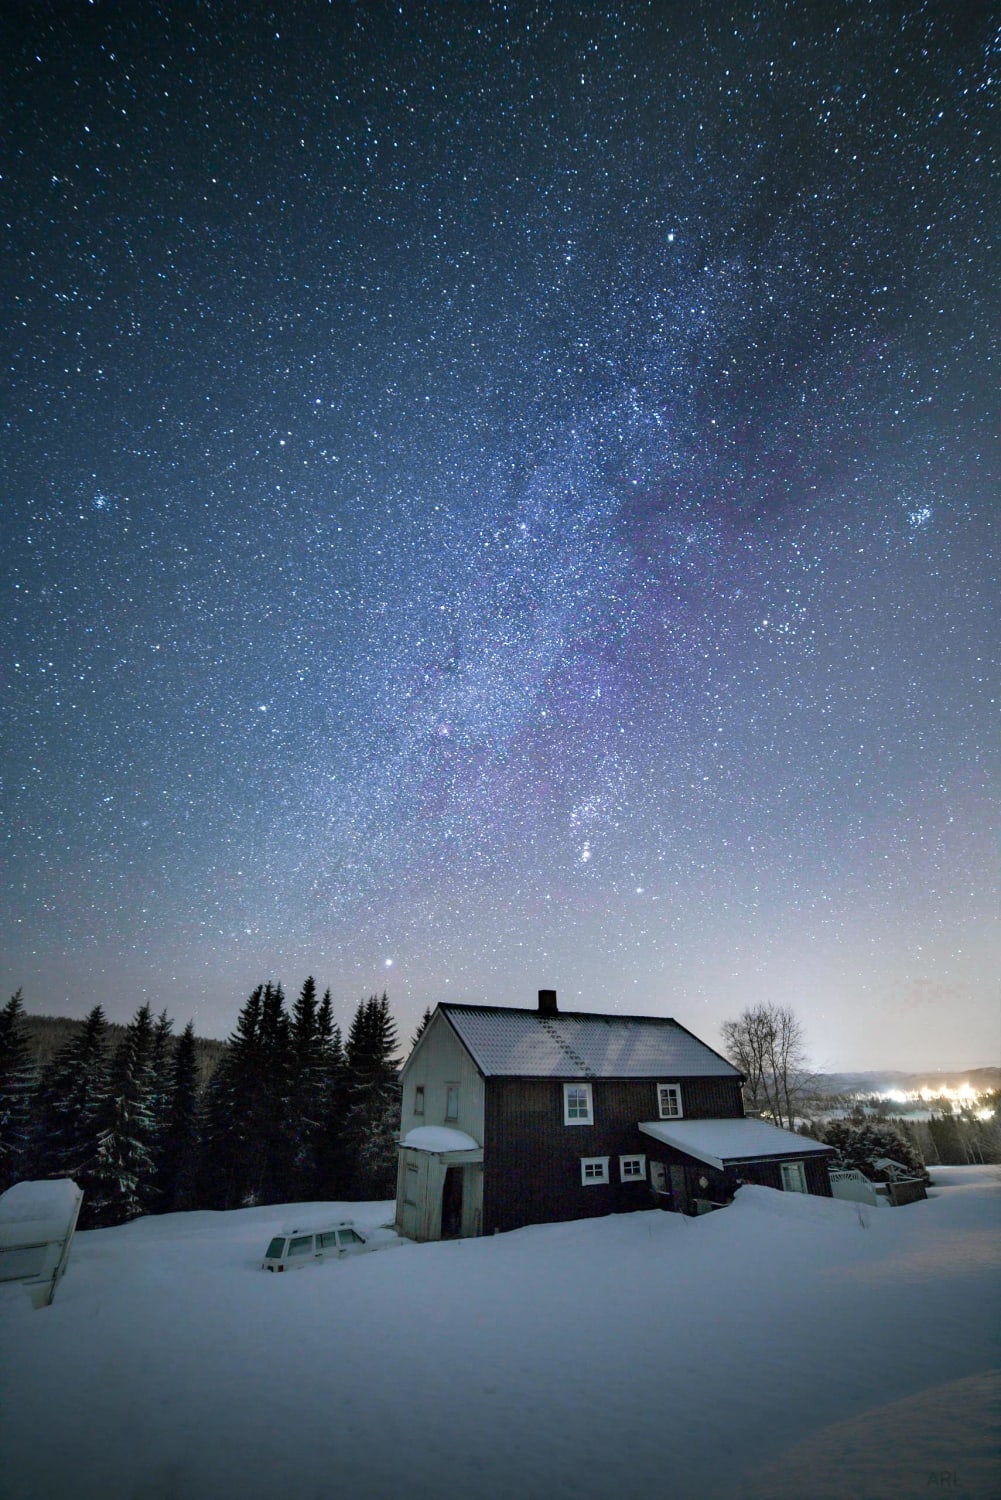 I took this of the Milky Way one year ago, in Norway.